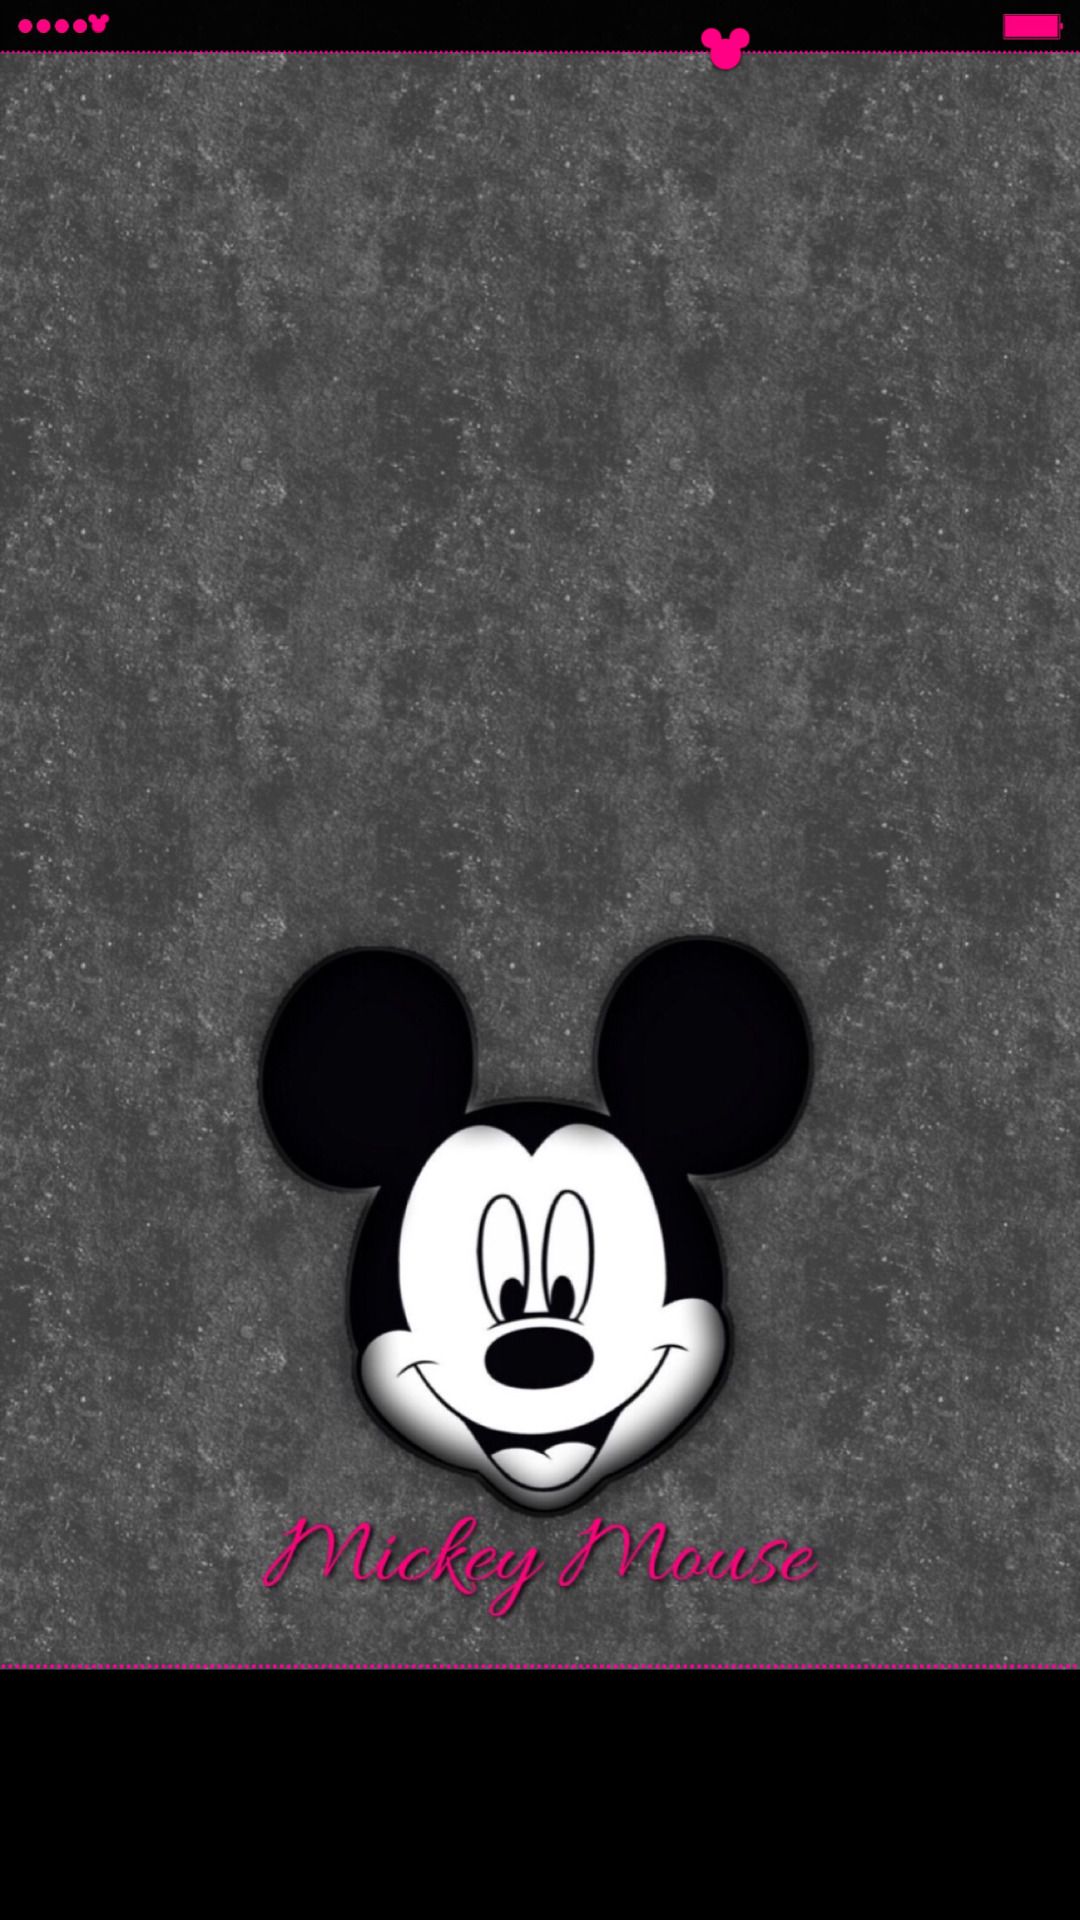 Tee S Iscreens Mickey Mouse Wallpaper